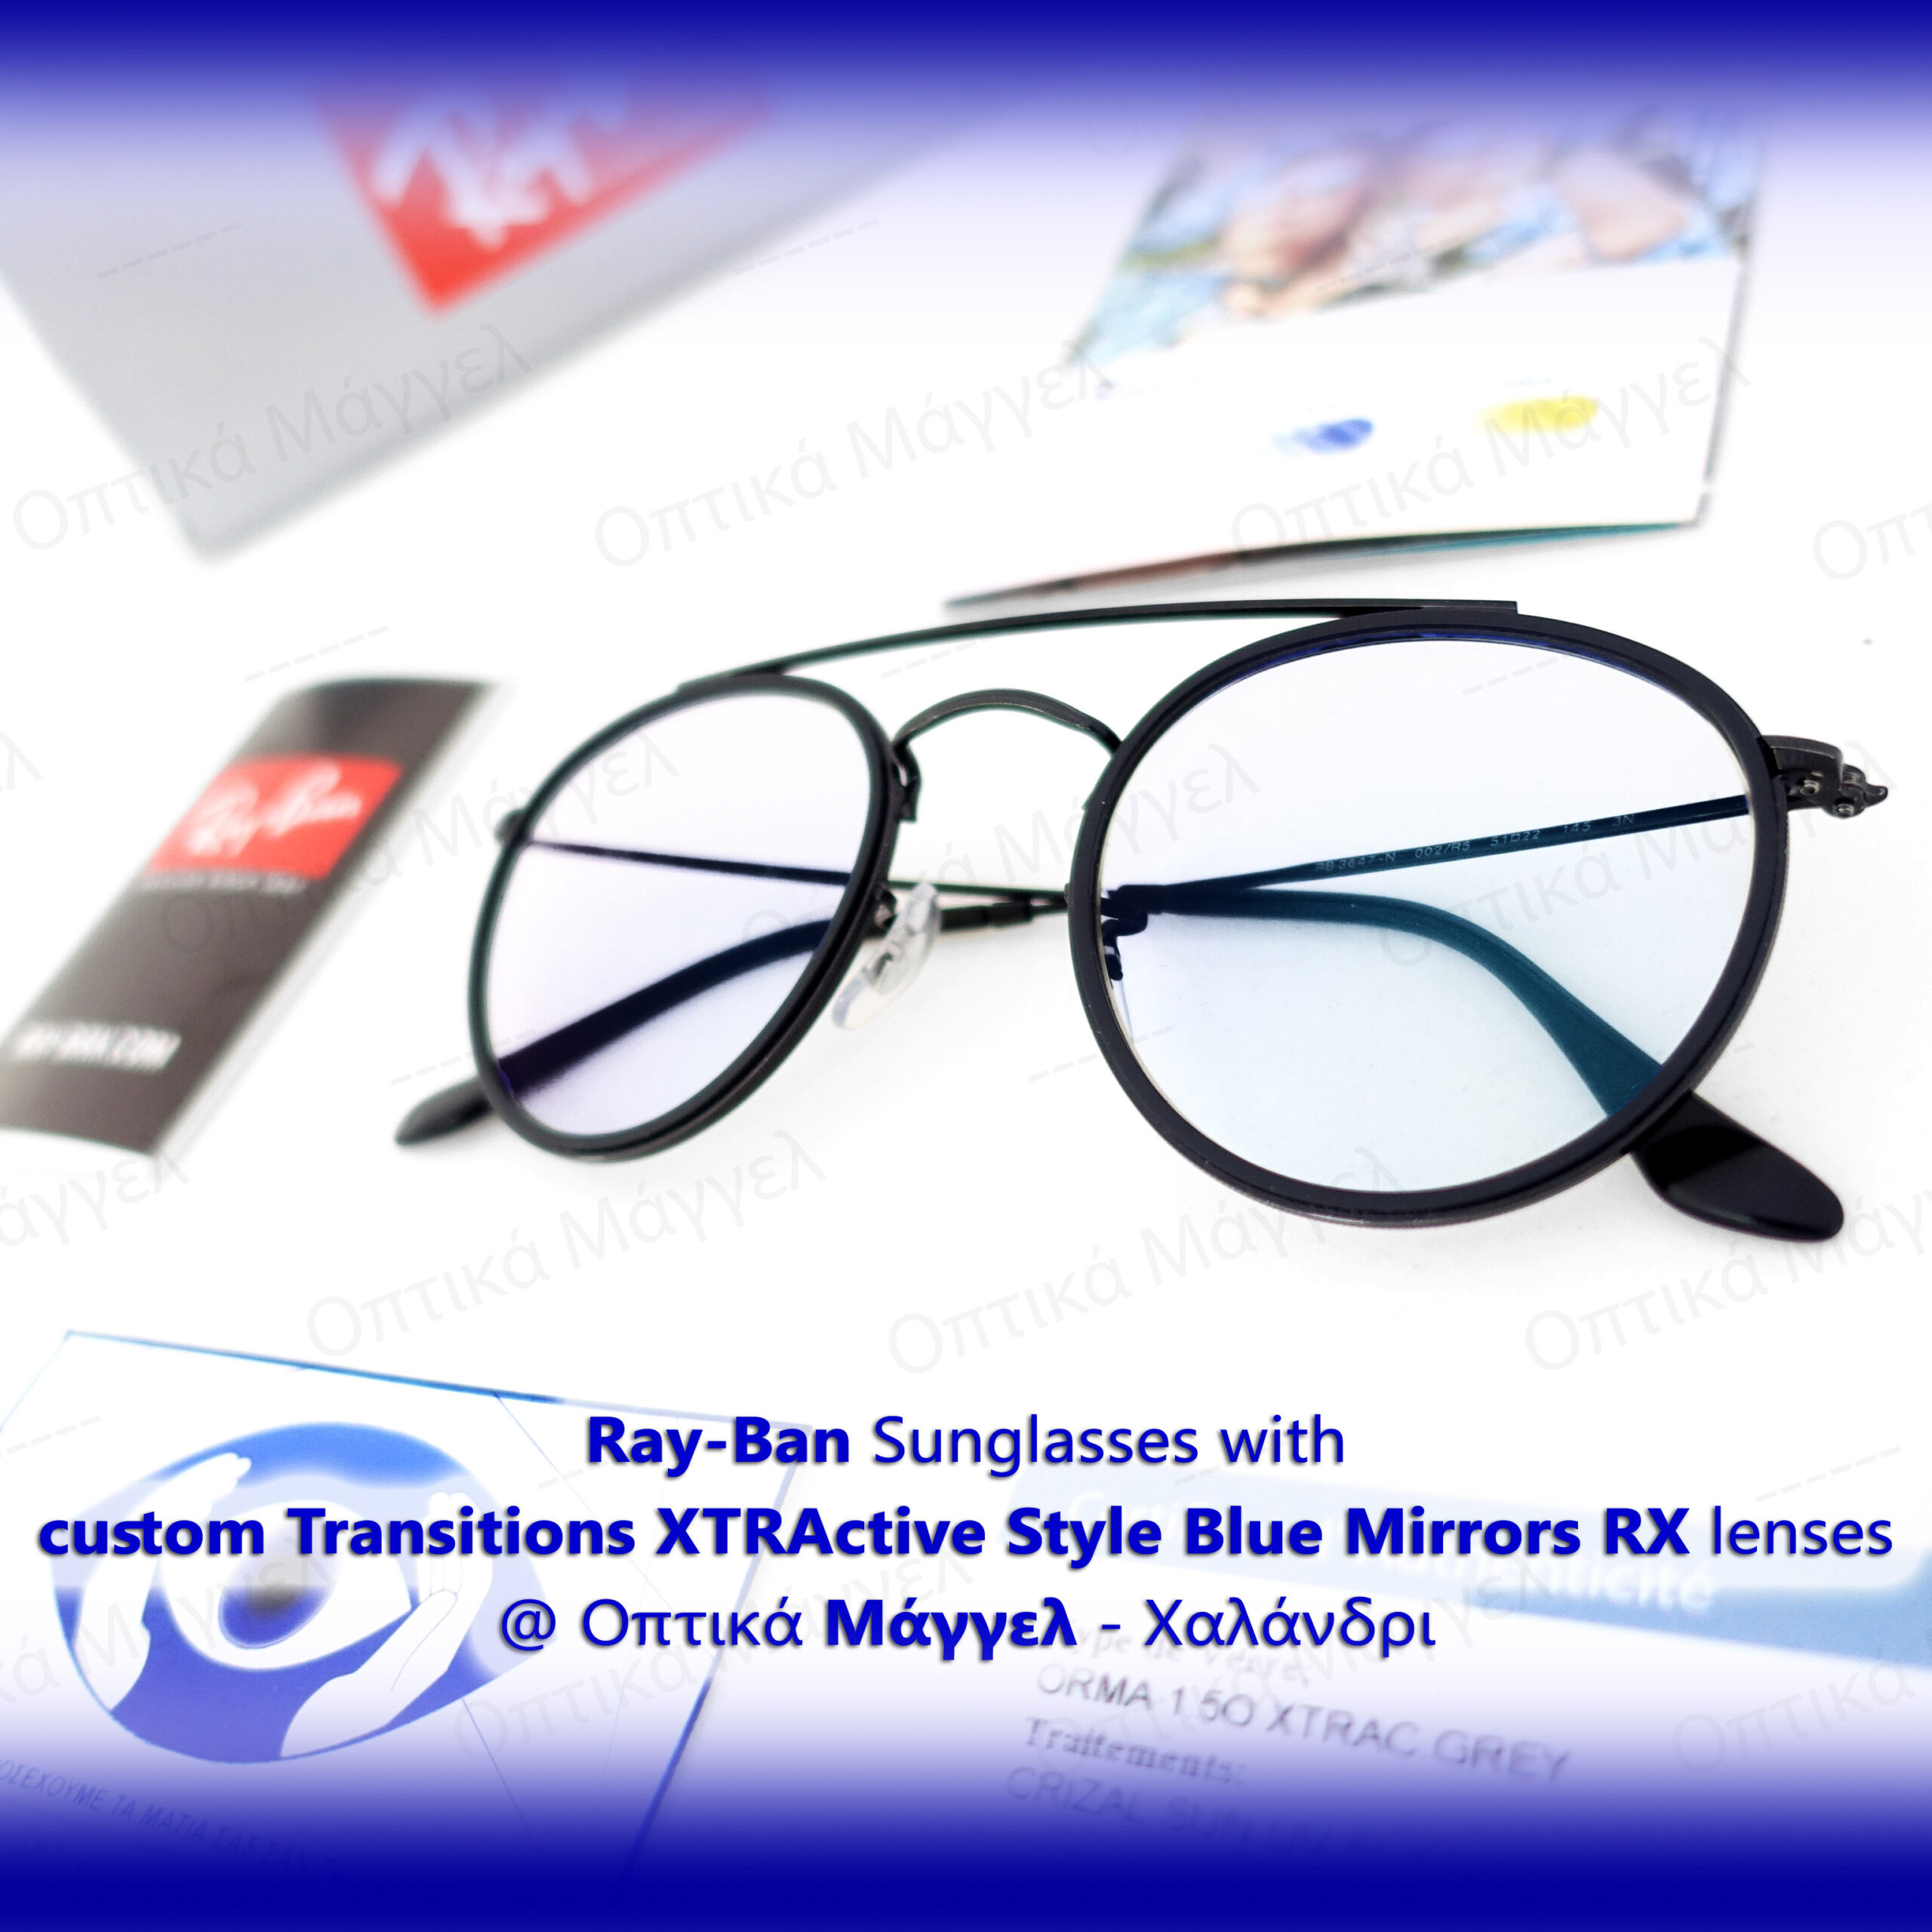 Perfection! Ray-Ban with Transitions XTRActive Style Mirrors Blue!